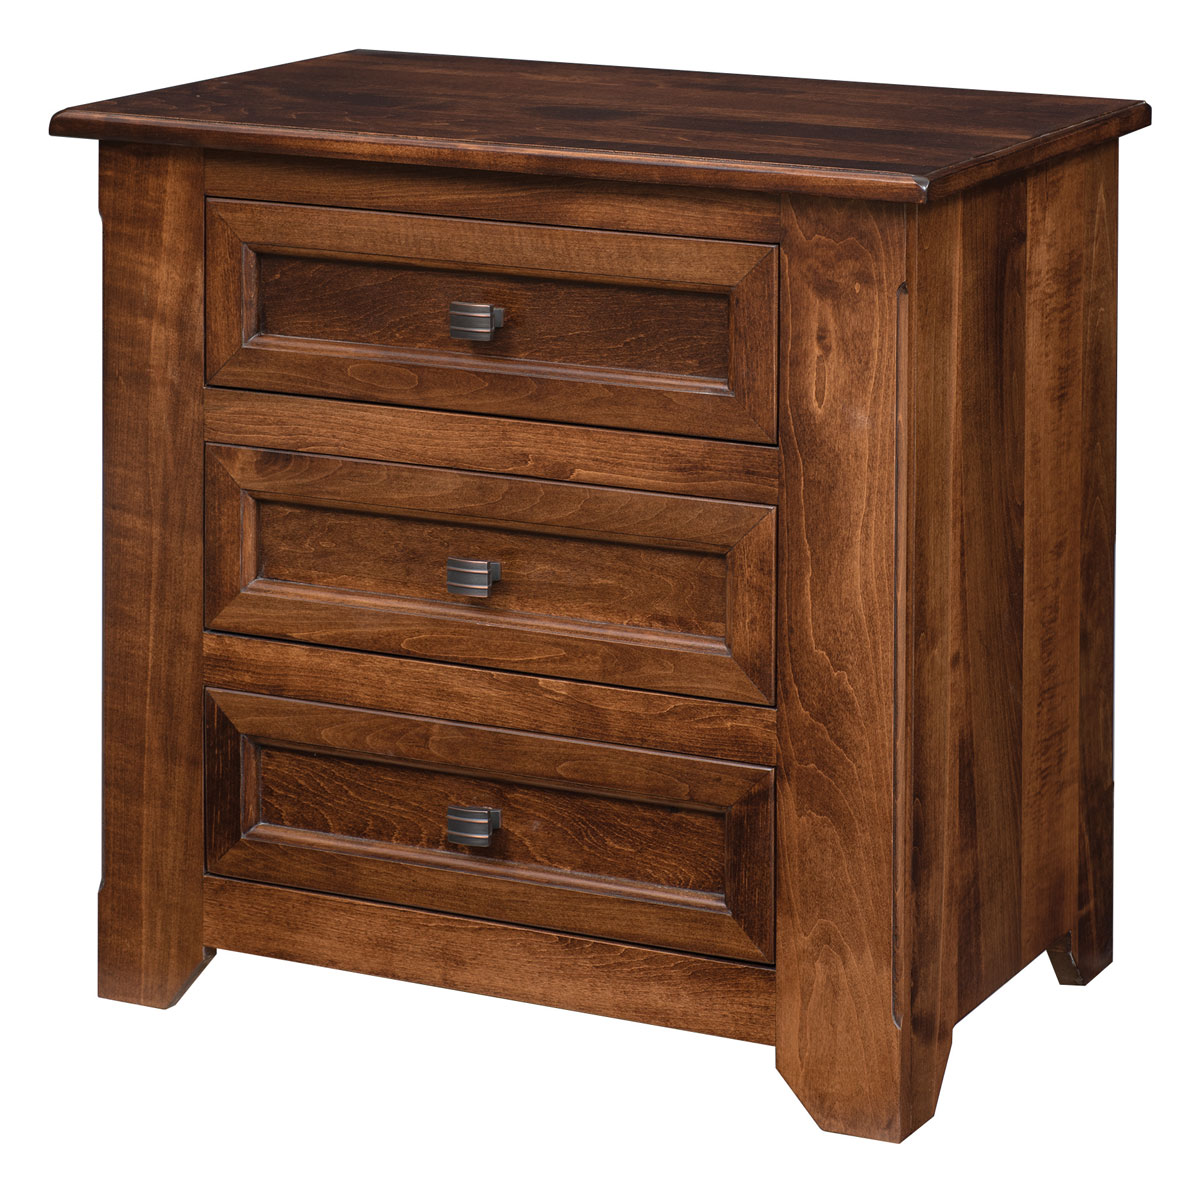 Savannah 3 Drawer Nightstand shown in Brown Maple with an OCS-117 Asbury Stain.